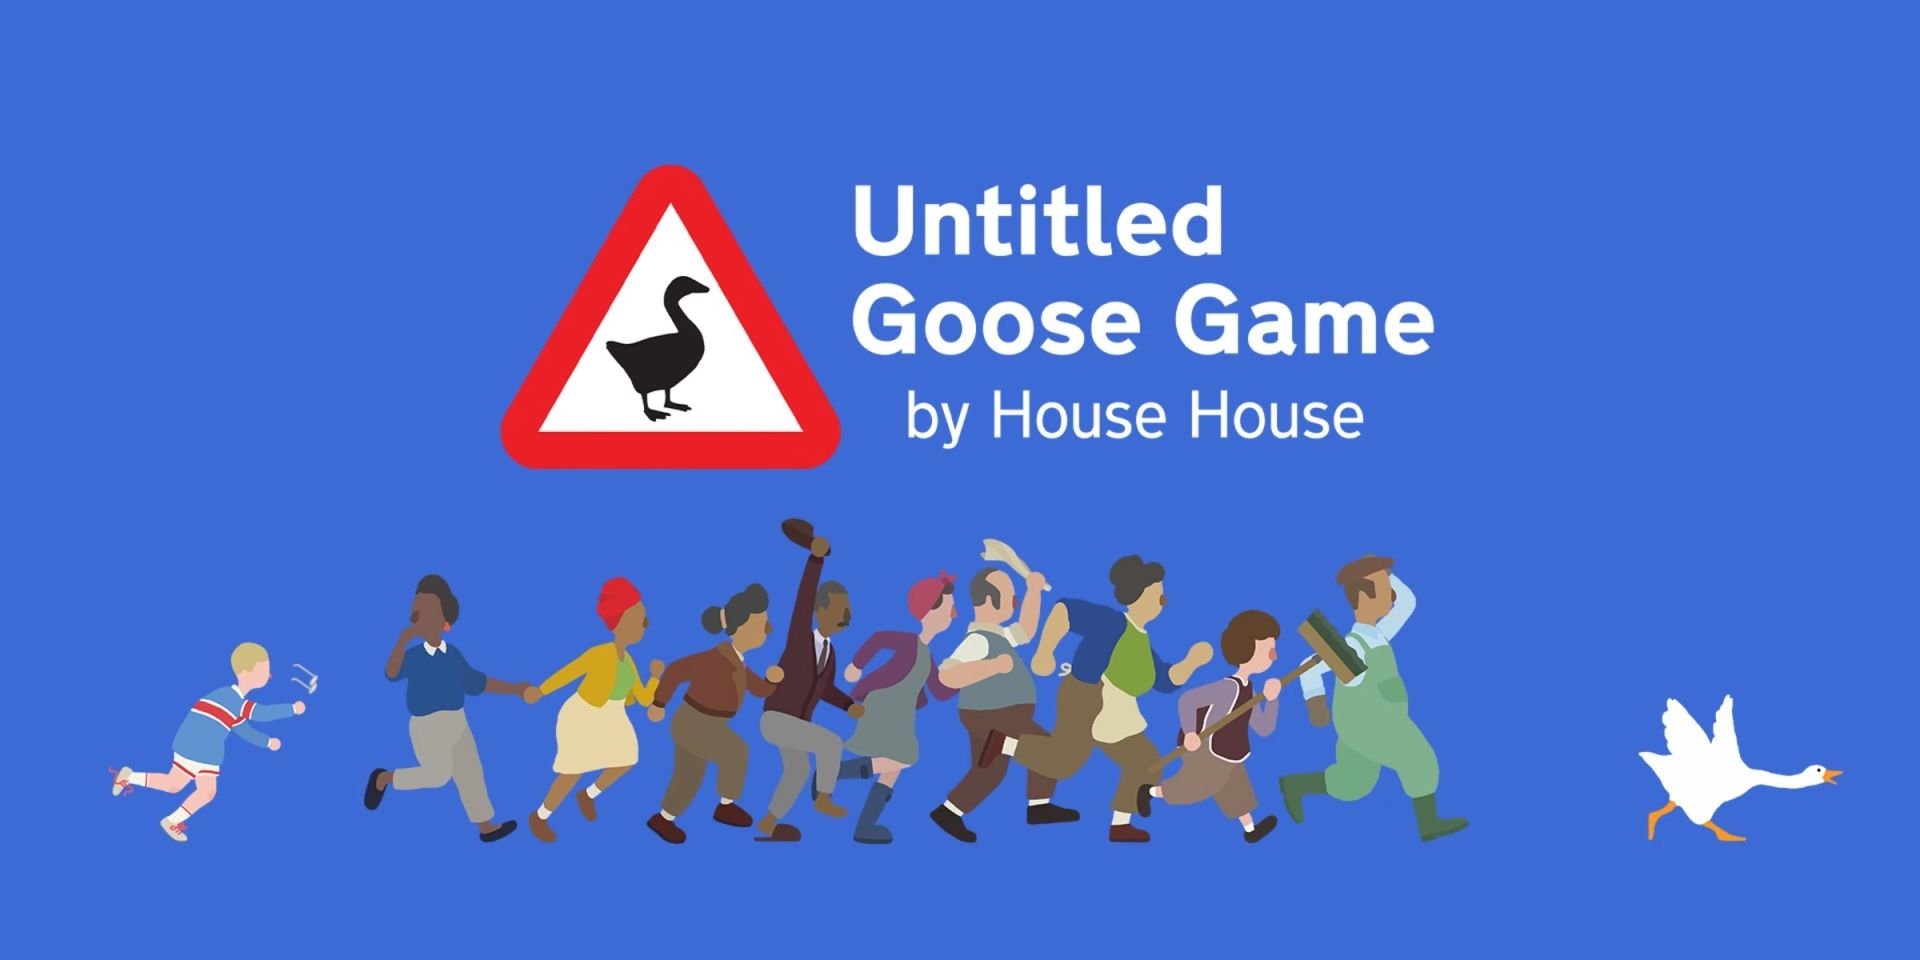 Untitled Goose Game cover art